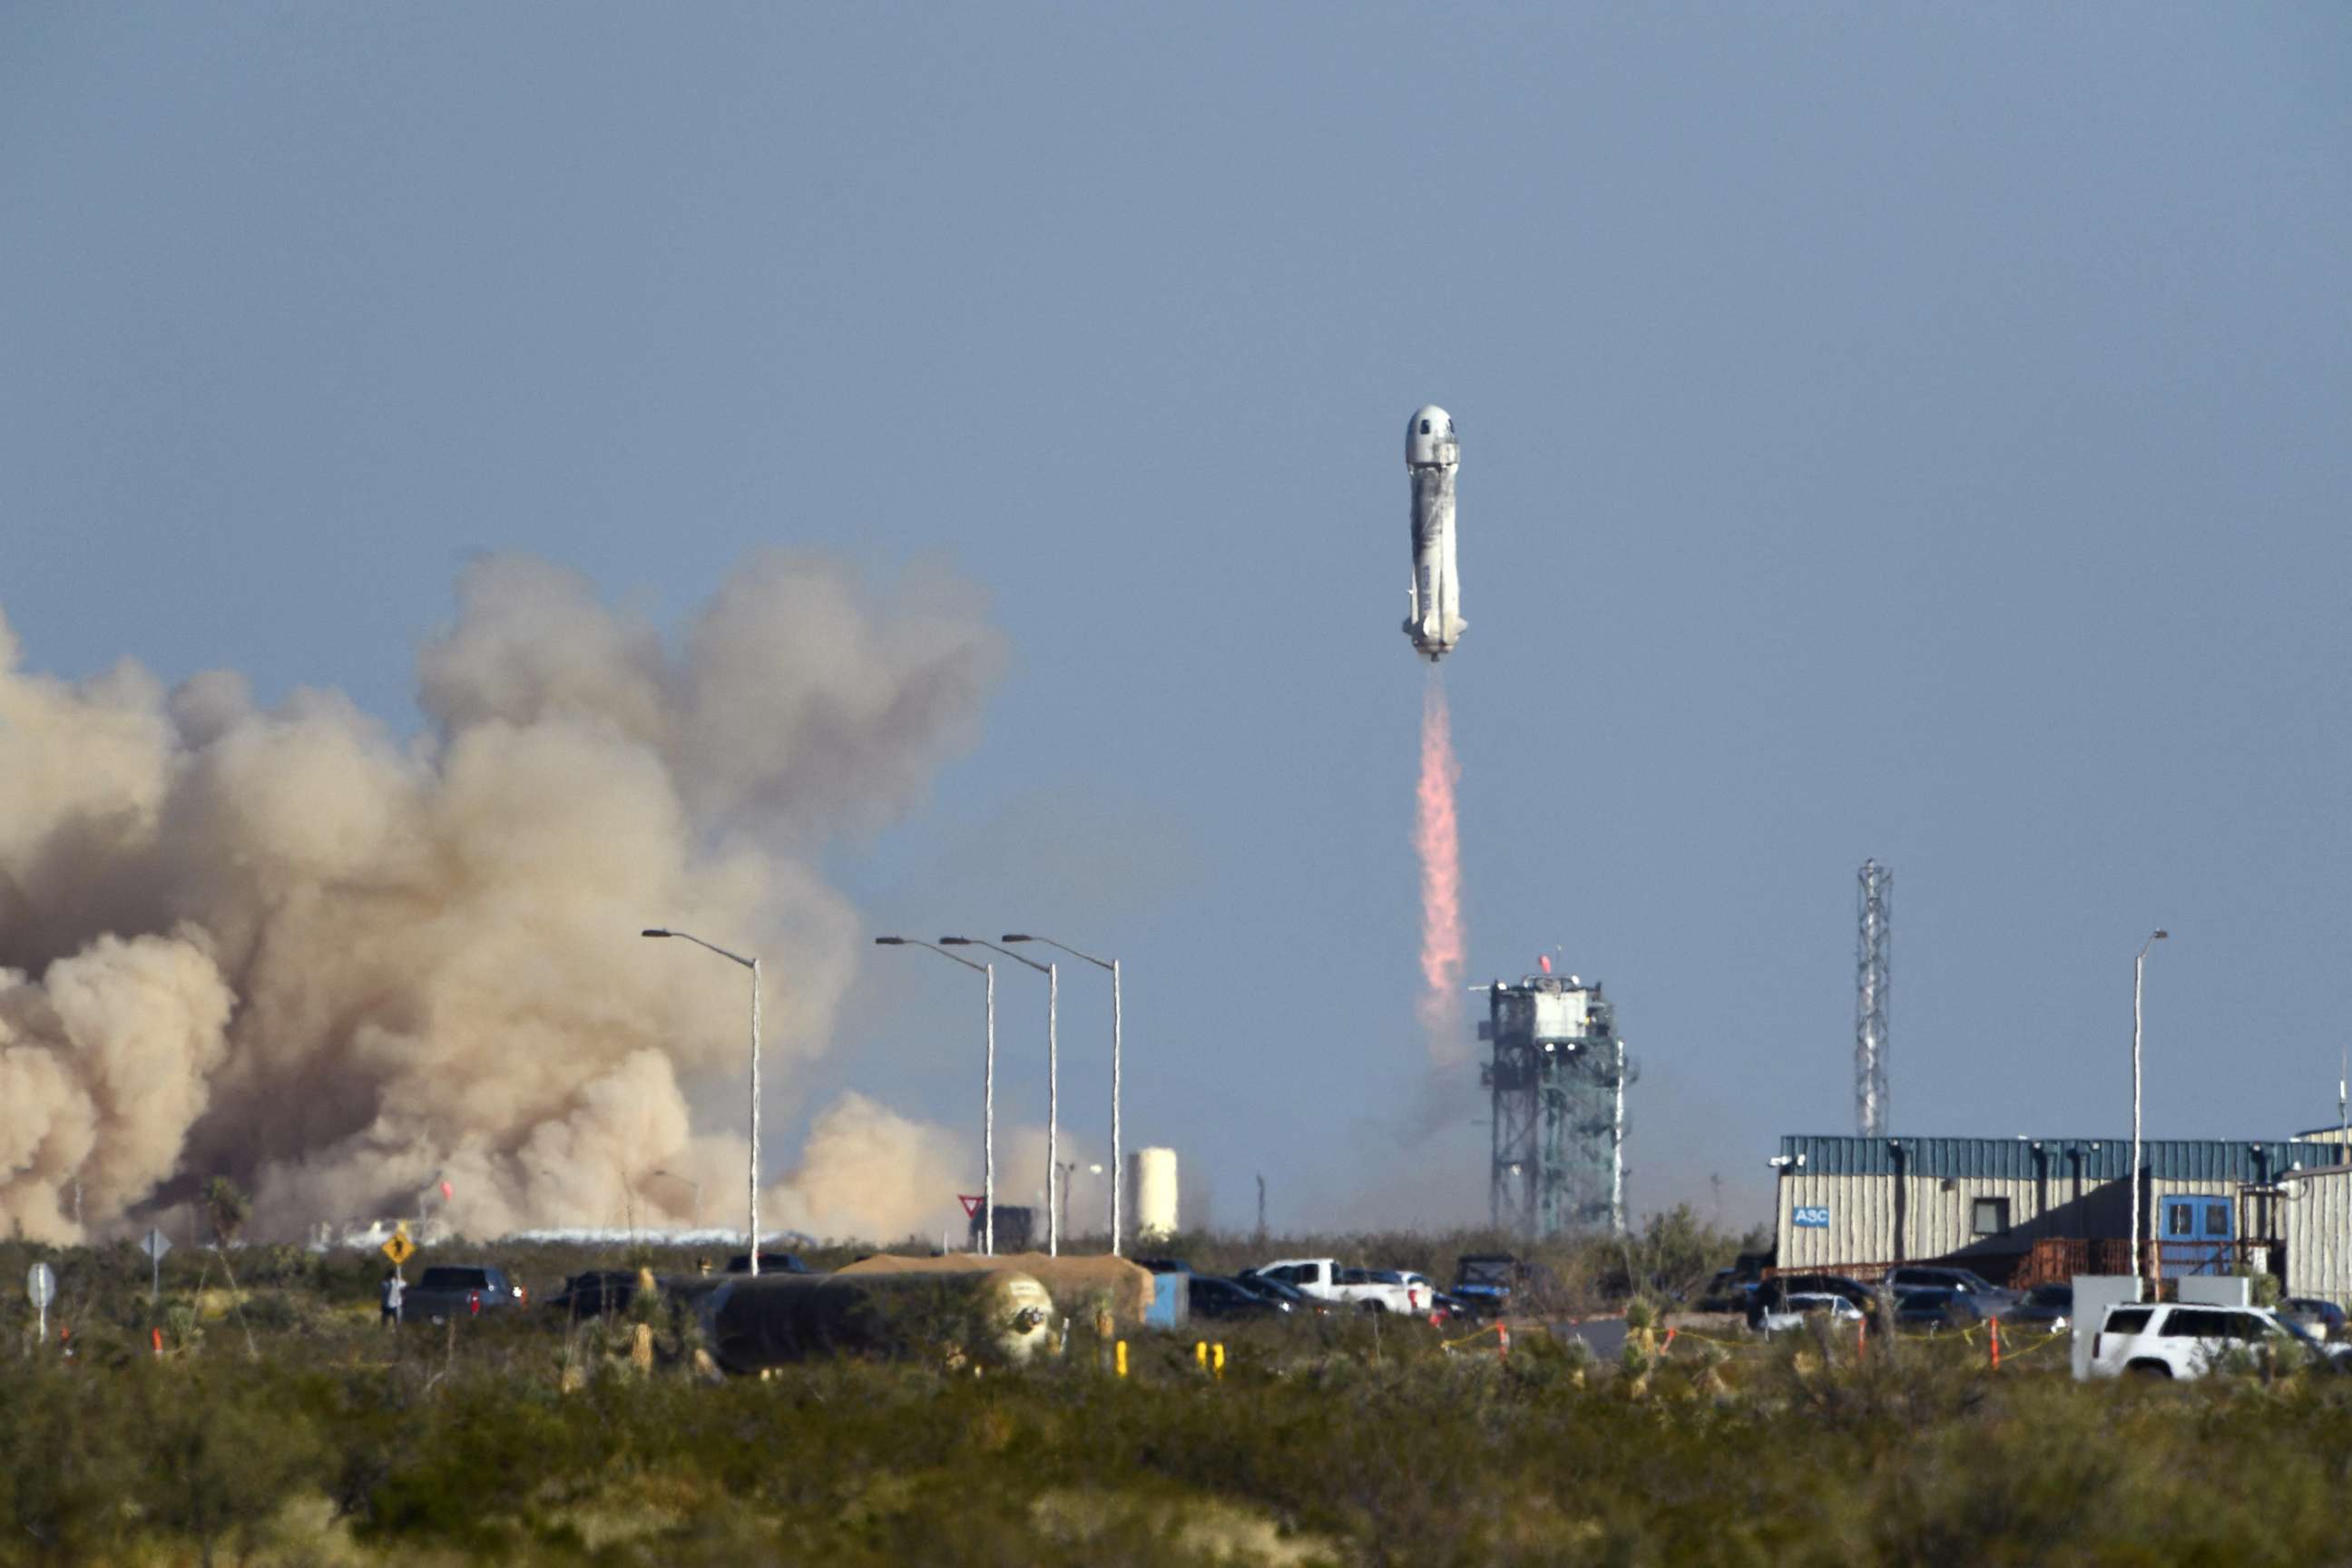 PHOTO: The New Shepard rocket launches on Oct. 13, 2021, from the West Texas region, 25 miles north of Van Horn, with "Star Trek" actor William Shatner aboard.